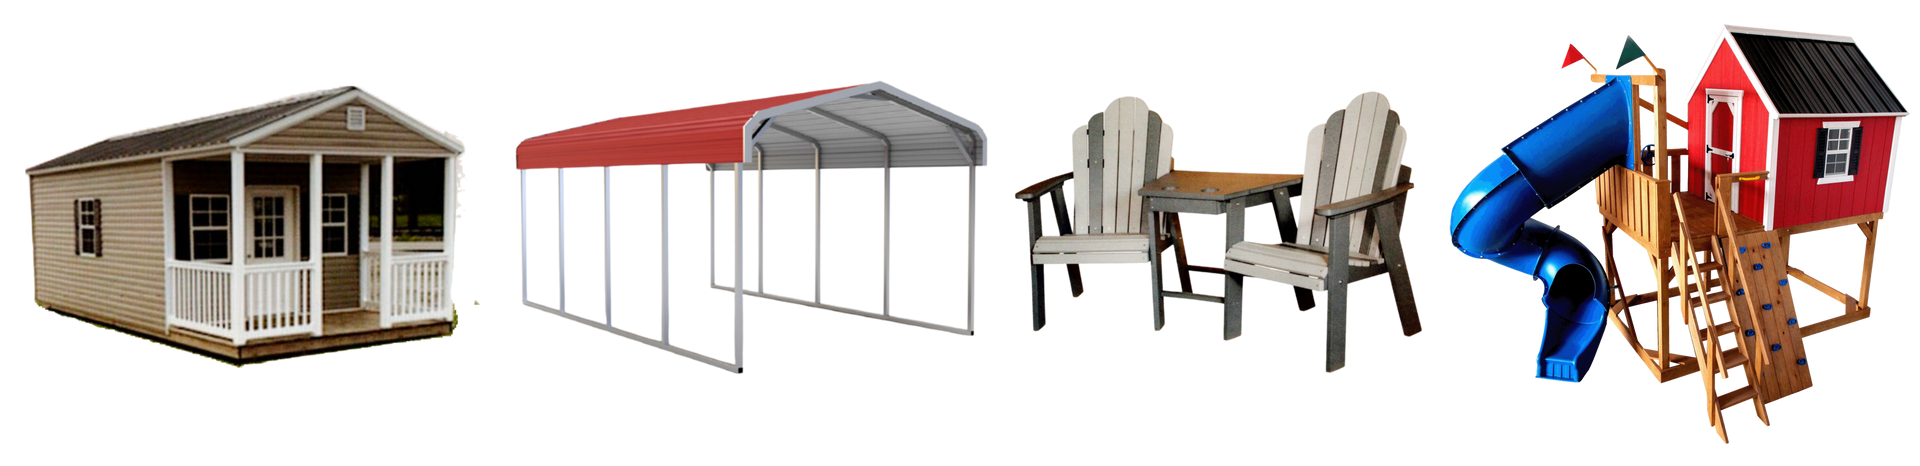 four different types of sheds are shown on a white background